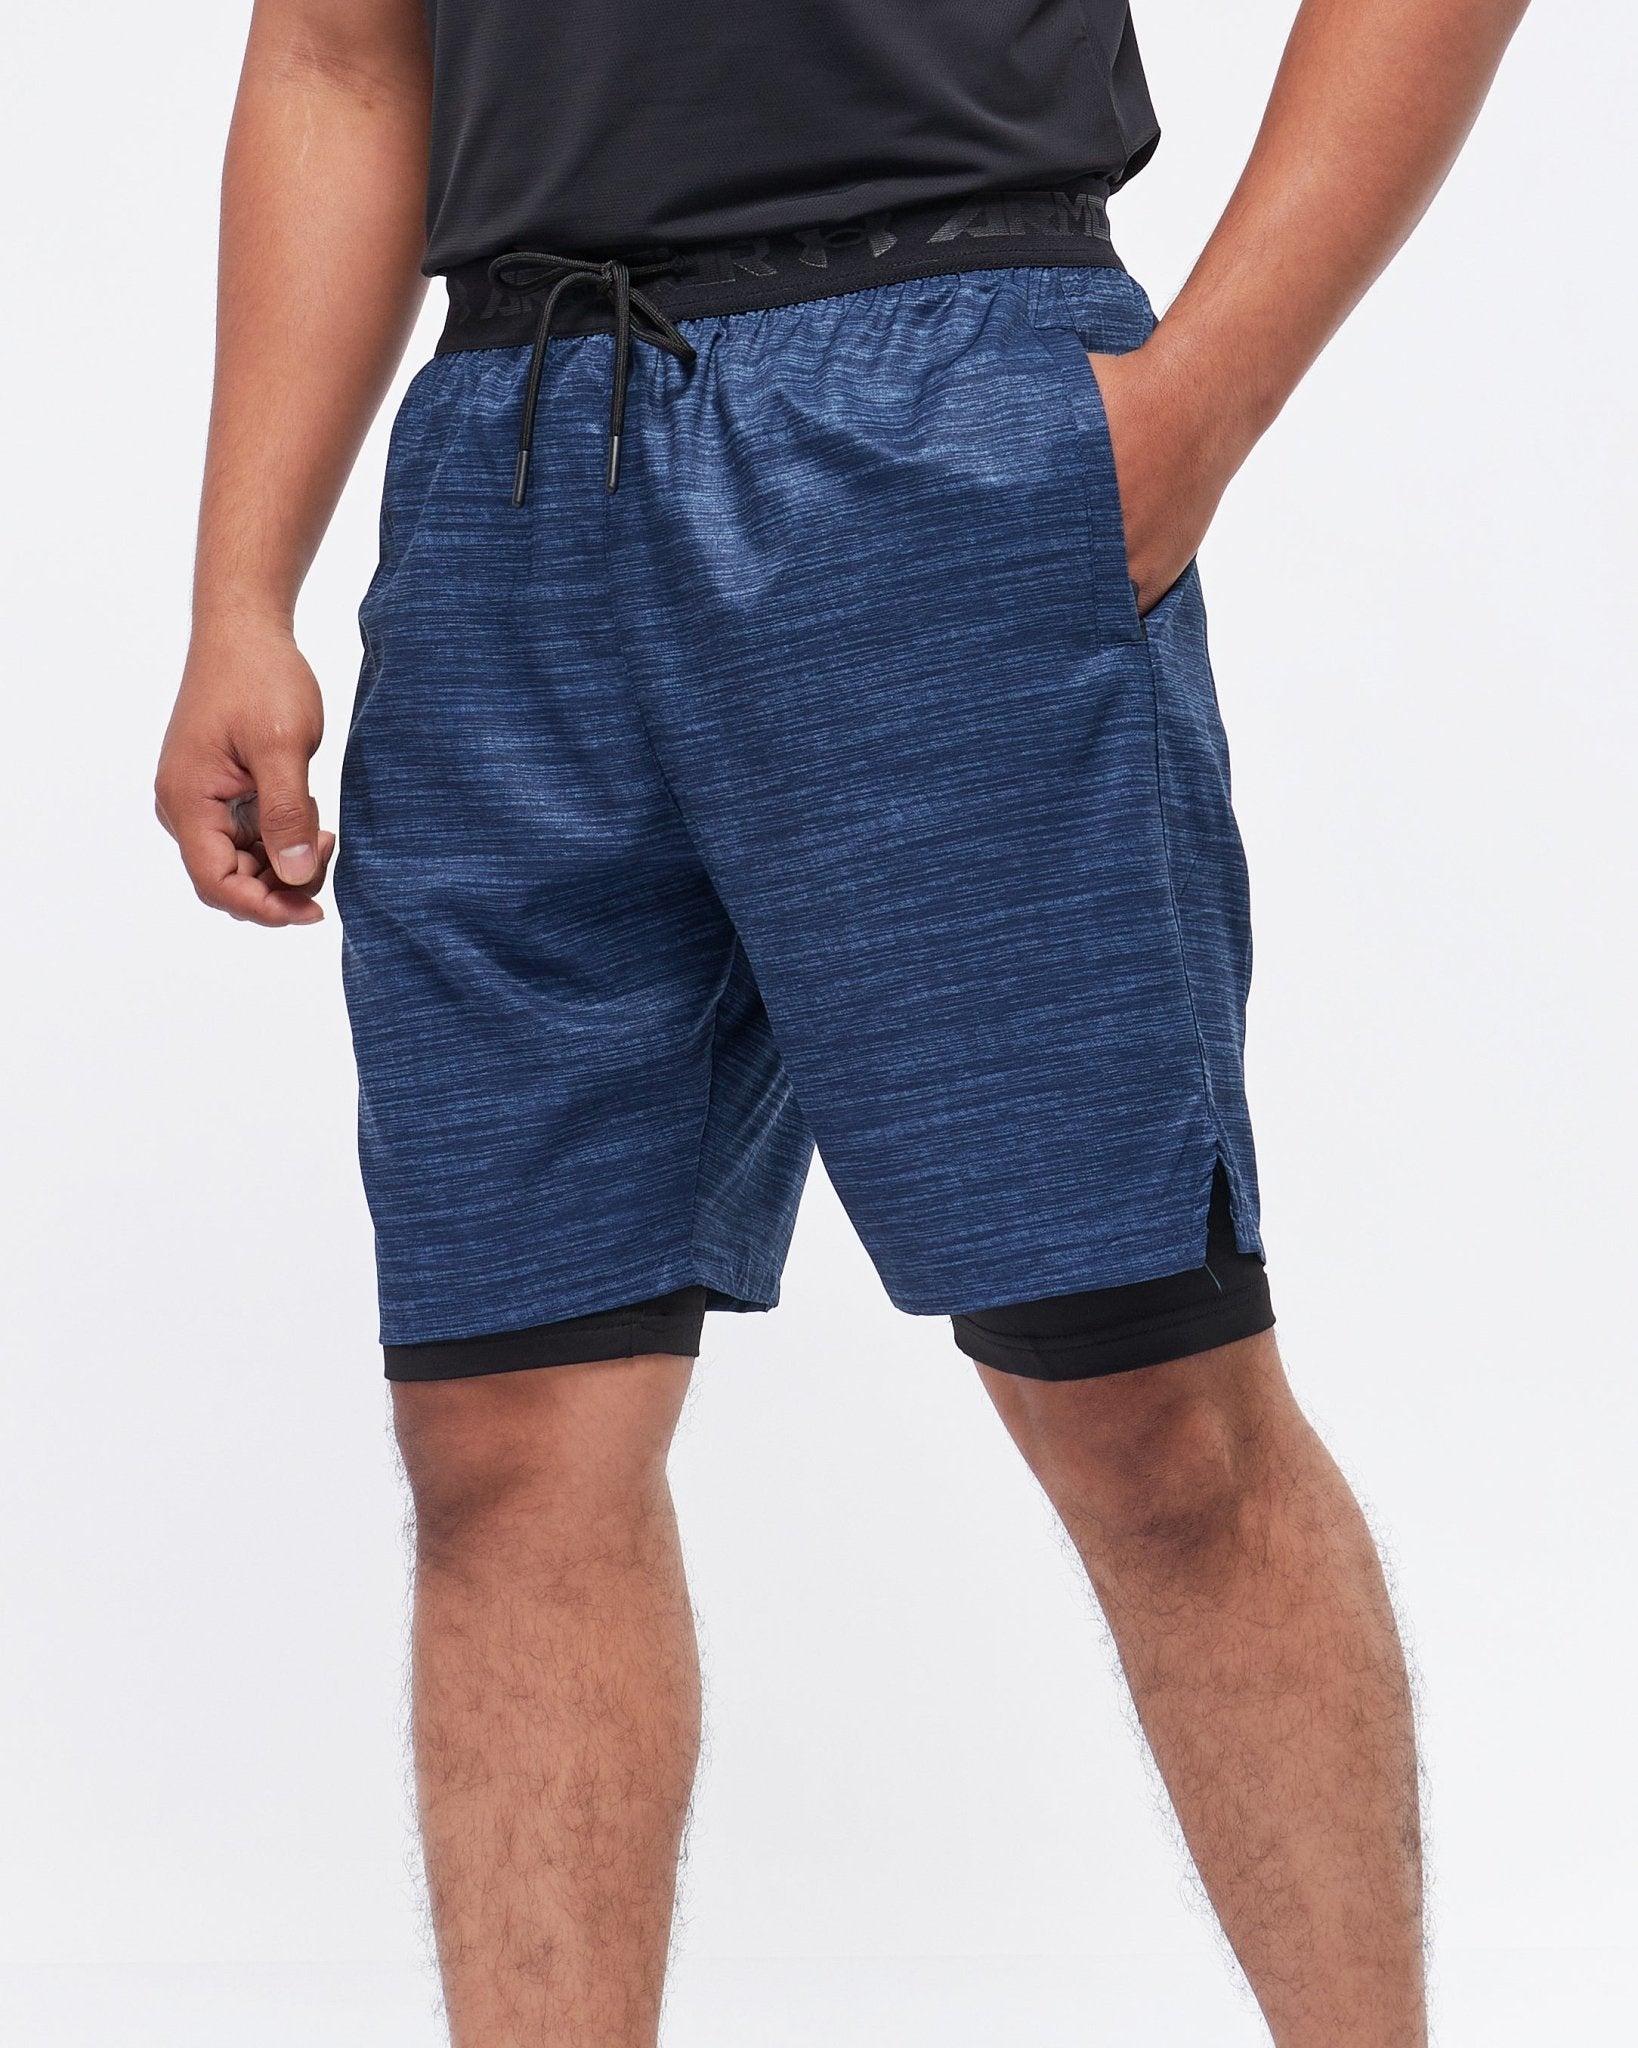 MOI OUTFIT-UA Stripes Over Printed 2 in 1 Men Sport Shorts 14.90